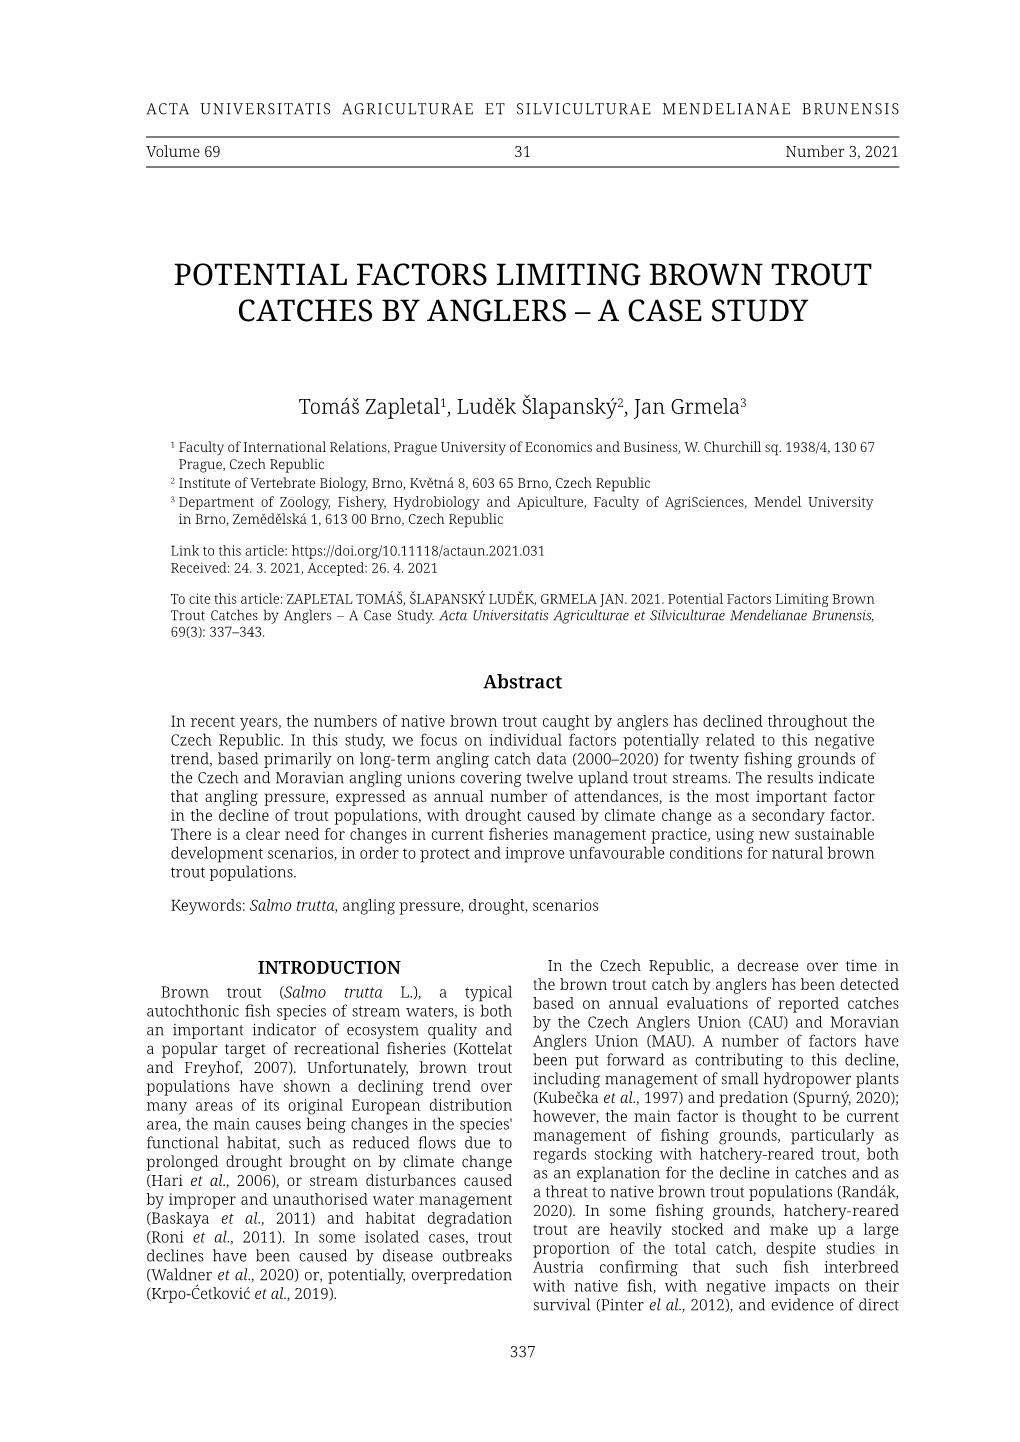 Potential Factors Limiting Brown Trout Catches by Anglers – a Case Study